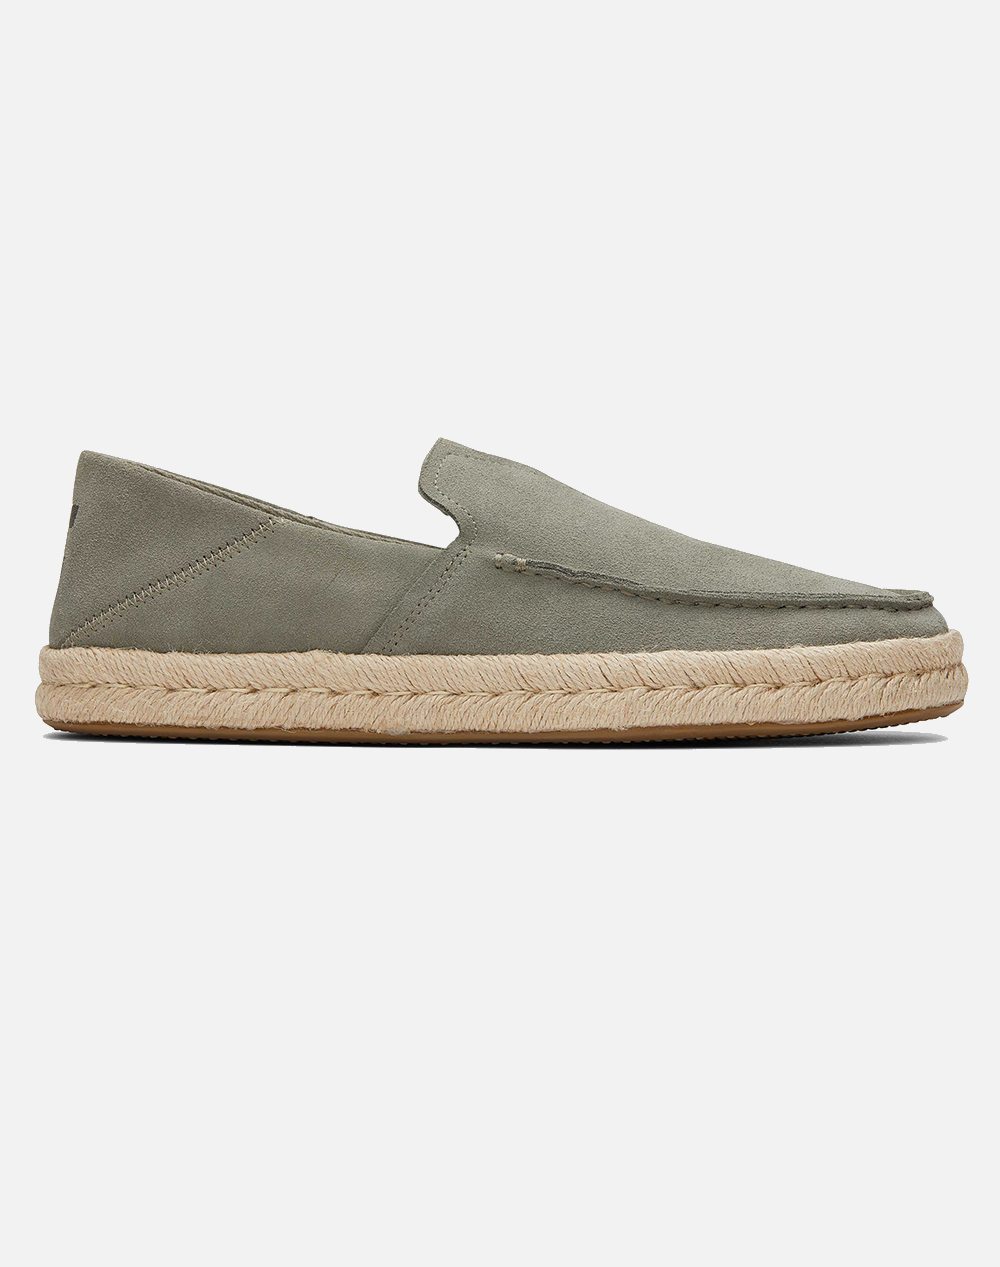 TOMS VET GRY SUEDE MN ALONSO ESP 10020874-OLIVE Olive